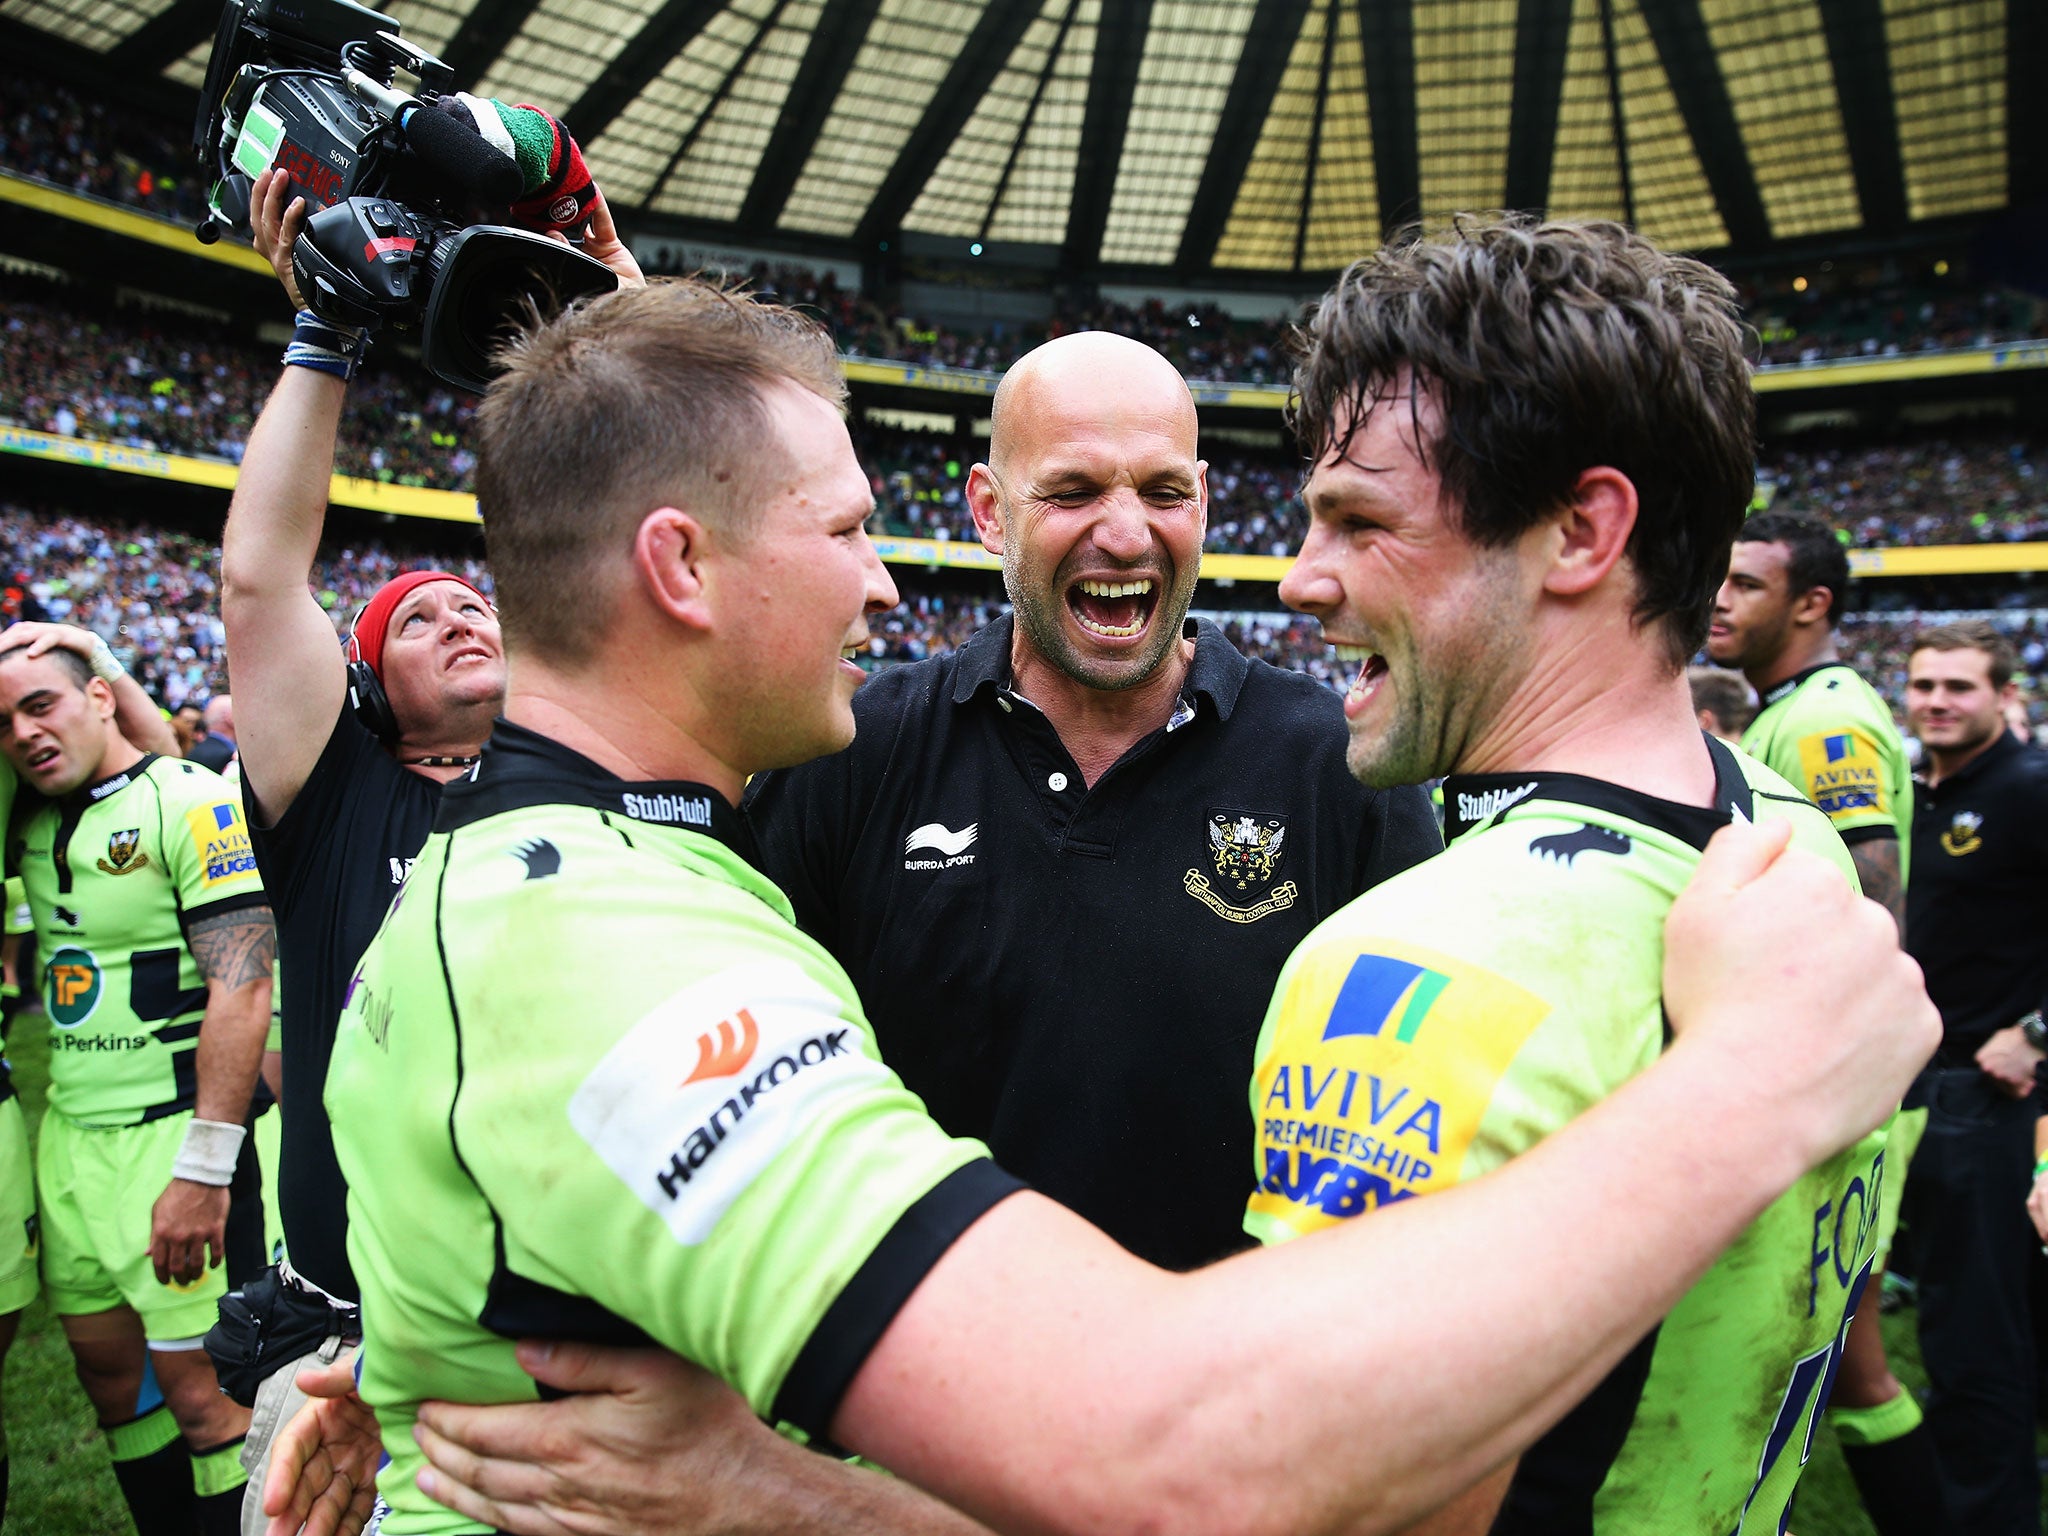 Northampton Saints players Dylan Hartley and Ben Foden celebrate with head coach Jim Mallinder